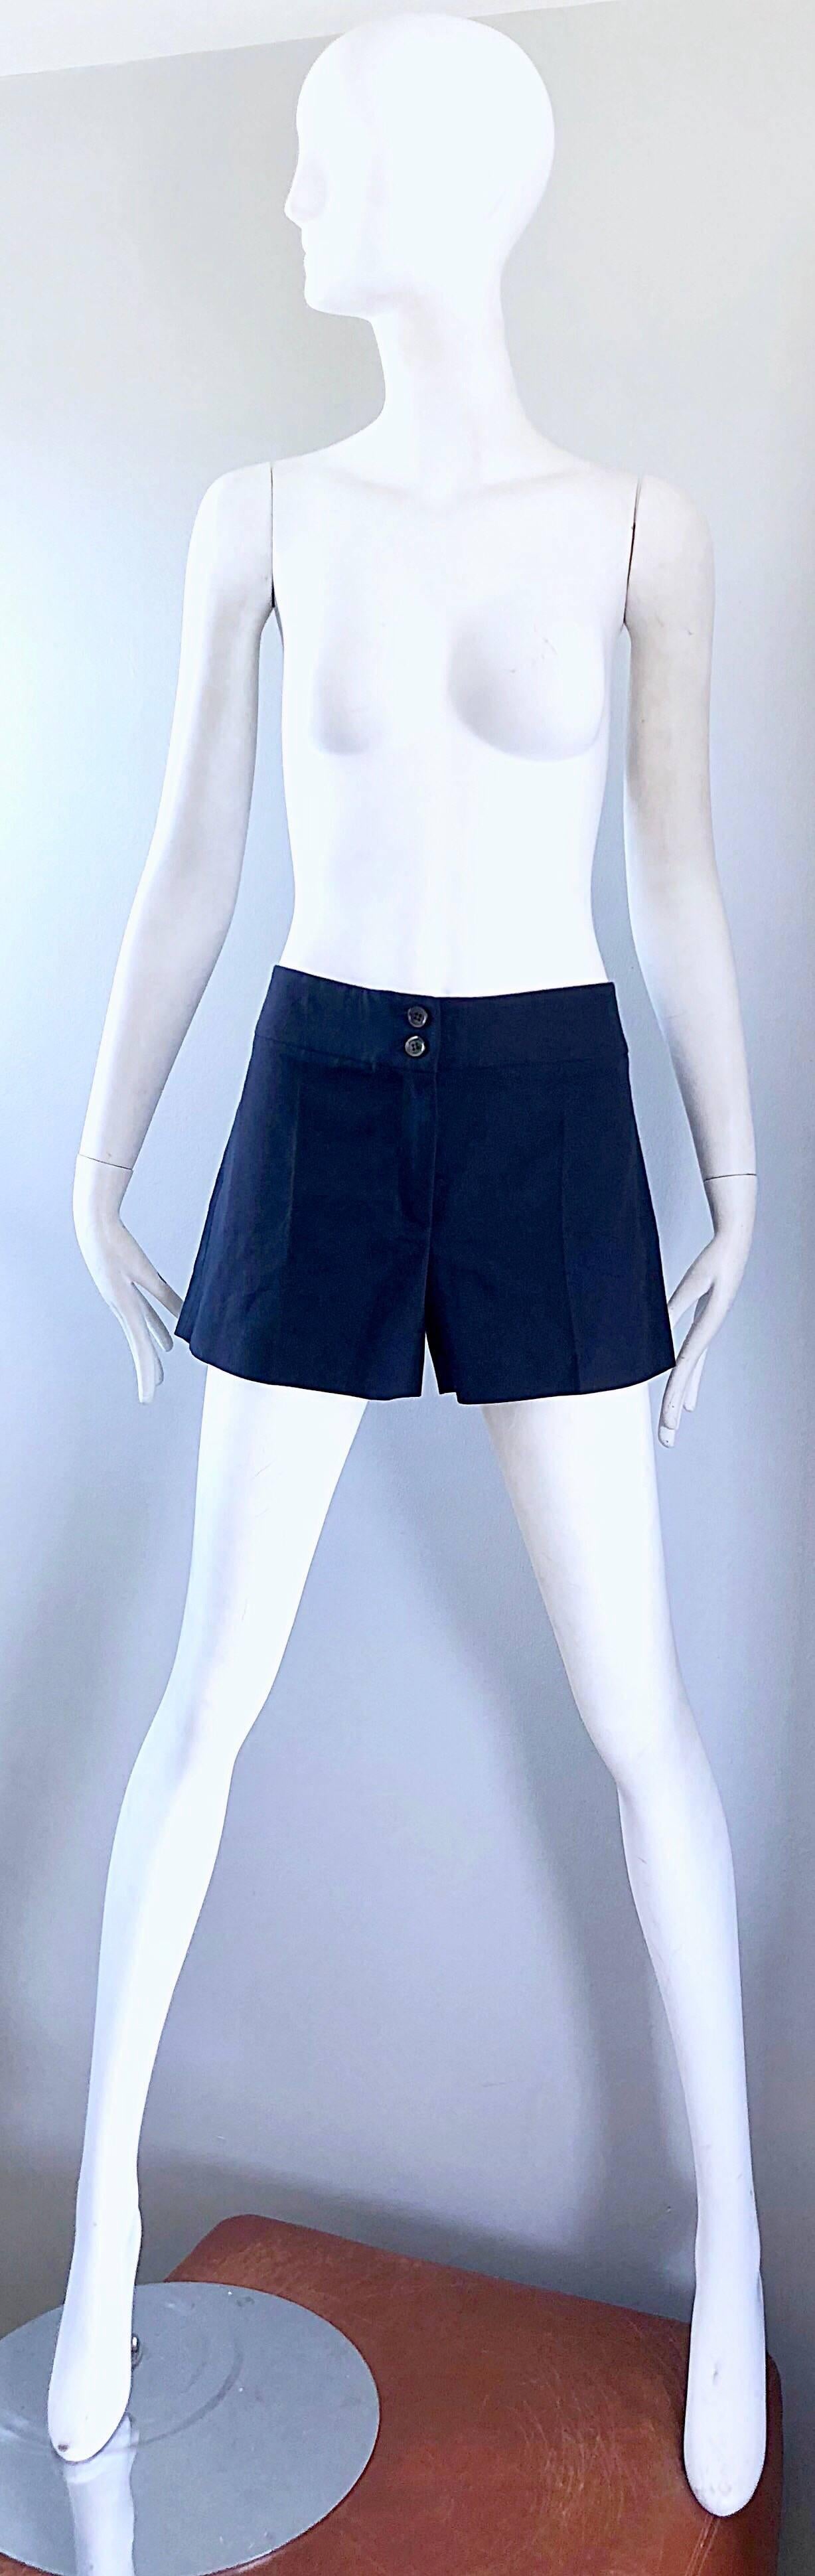 Early 2000s MICHAEL KORS COLLECTION low rise 3 inch inseam shorts! The perfect color to match anything. Soft cotton features a slight stretch. Two buttons at center waist with a zipper fly. Great with wedges and a crisp blouse, or perfect with a